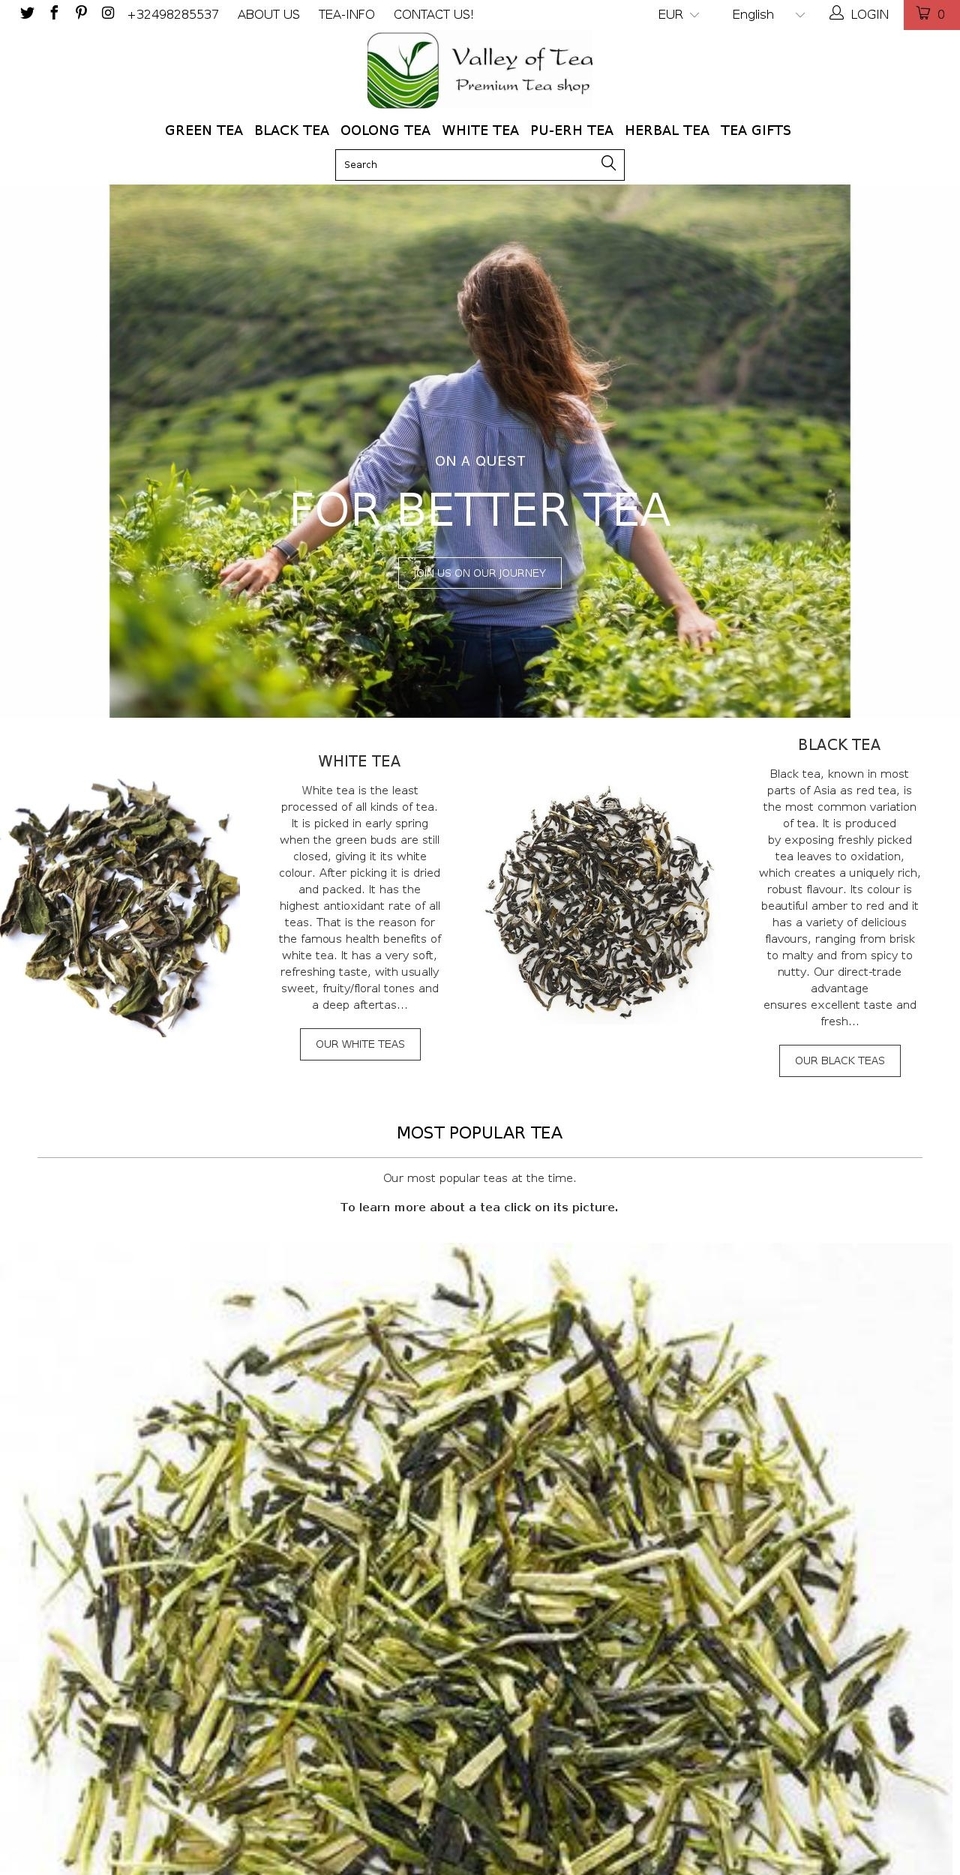 August Shopify theme site example valleyoftea.com